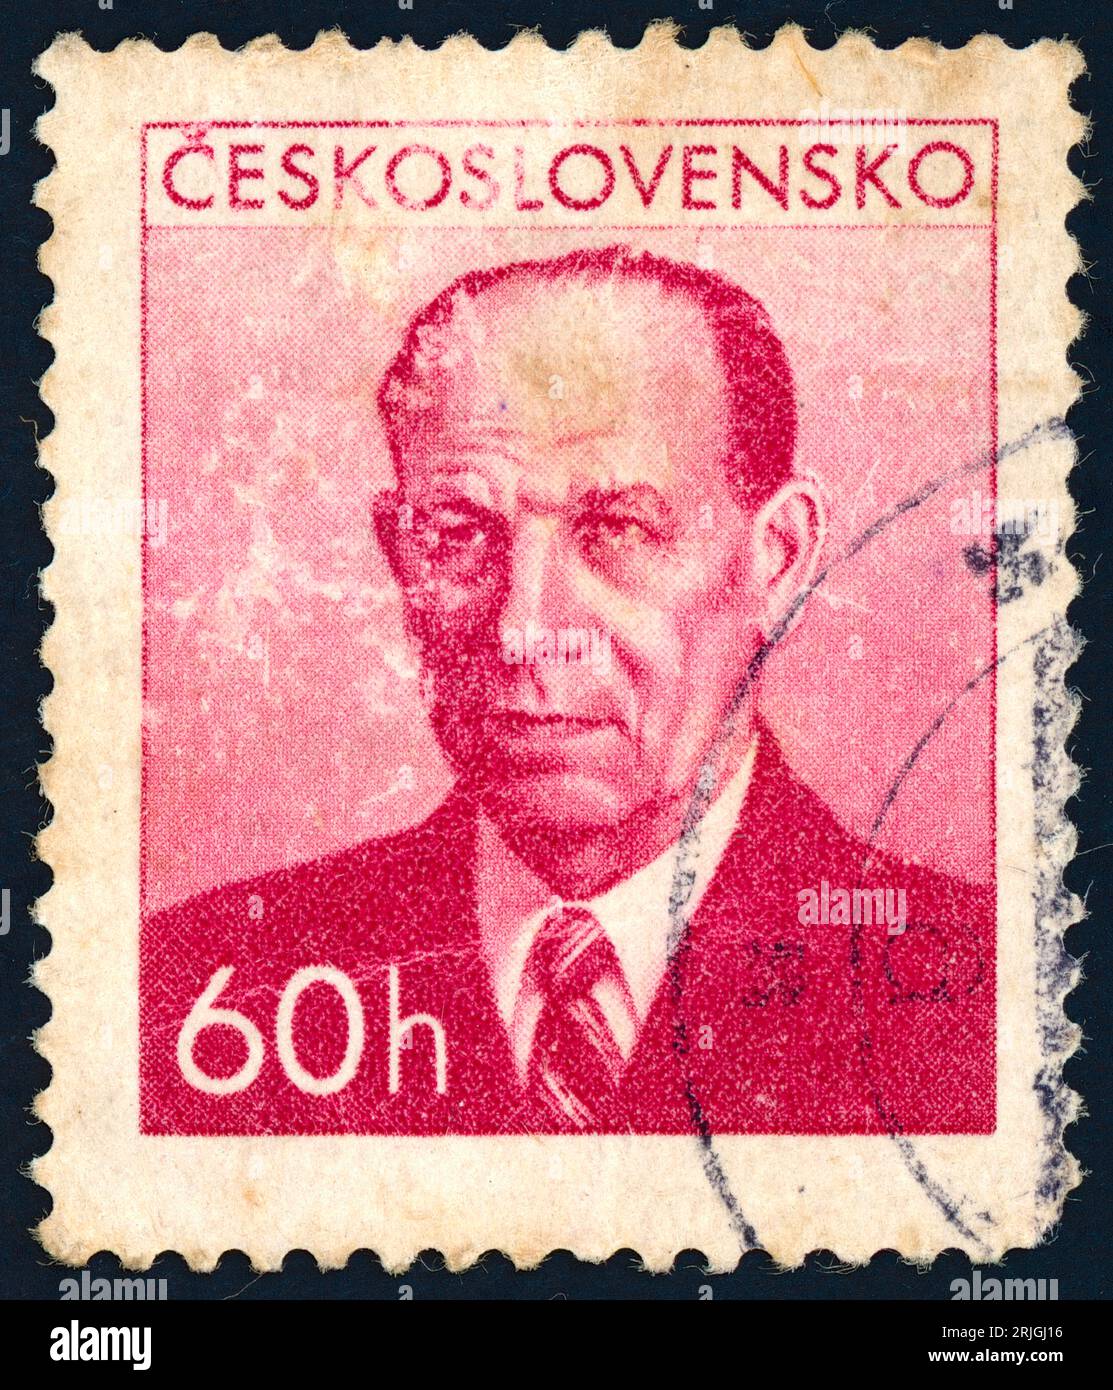 Antonín Zápotocký (1884 – 1957). Postage stamp issued in Czechoslovakia in 1953. Antonín Zápotocký was a Czech communist politician and statesman who served as the prime minister of Czechoslovakia from 1948 to 1953 and the president of Czechoslovakia from 1953 to 1957. Stock Photo